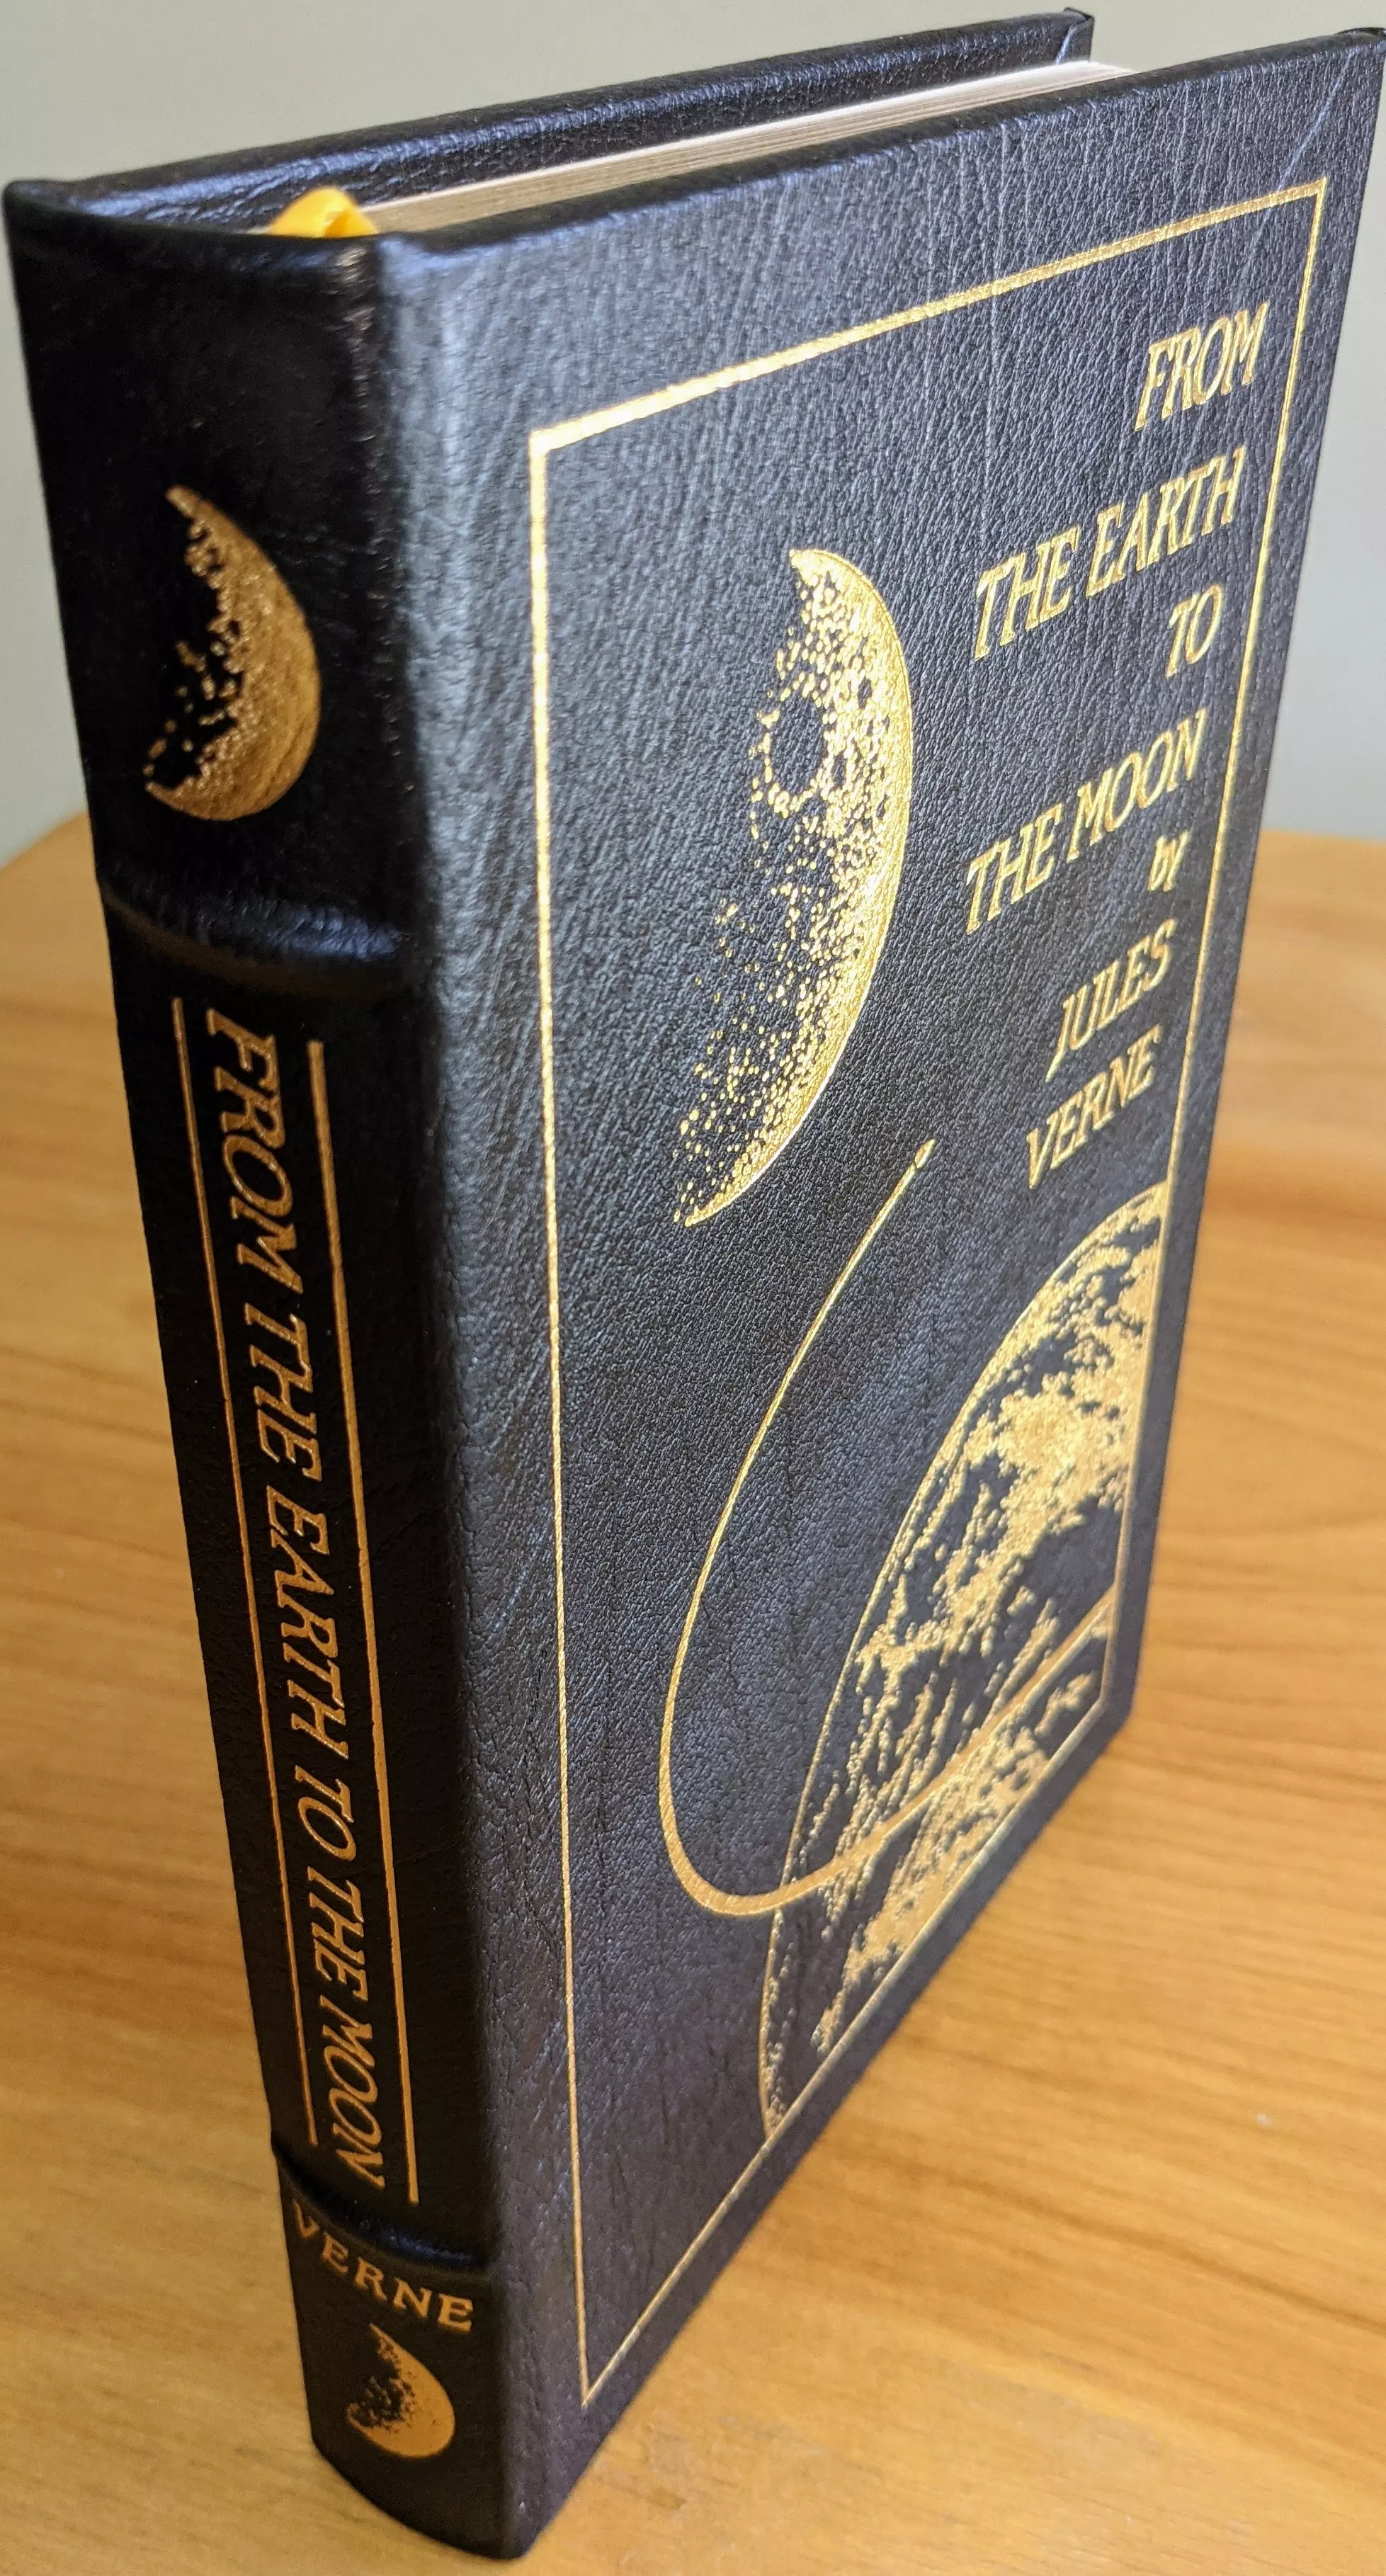 Stunning Black Leather Bound hardback book with hubbed spine, cover artwork in 22kt gold, printed on archival paper with gold gilded edges, smyth sewing & concealed muslin joints
	  - original artwork by Robert Shore